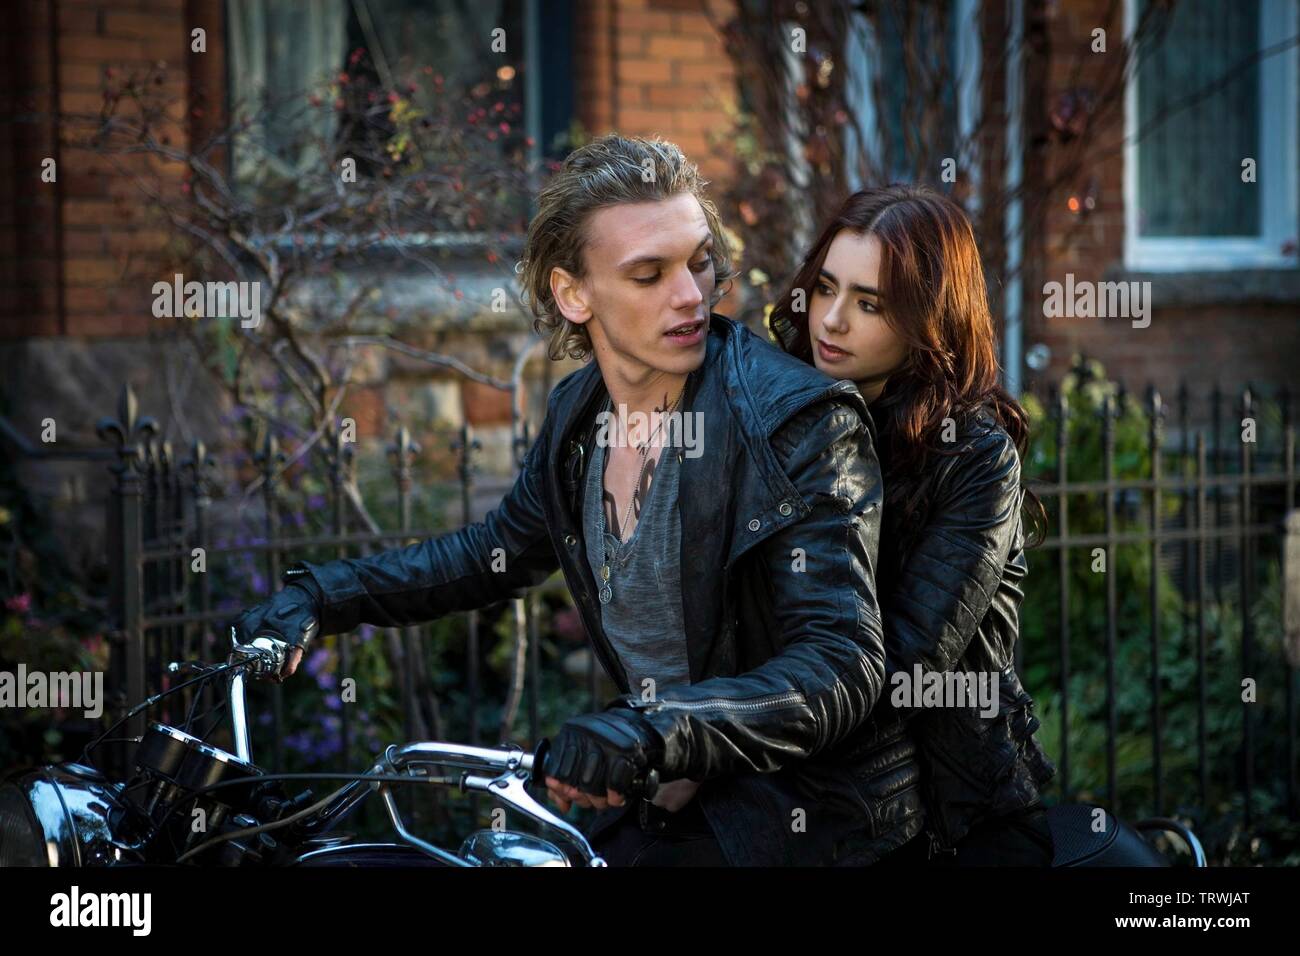 LILY COLLINS and JAMIE CAMPBELL BOWER in MORTAL INSTRUMENTS, THE: CITY OF  BONES (2013). Copyright: Editorial use only. No merchandising or book covers.  This is a publicly distributed handout. Access rights only,